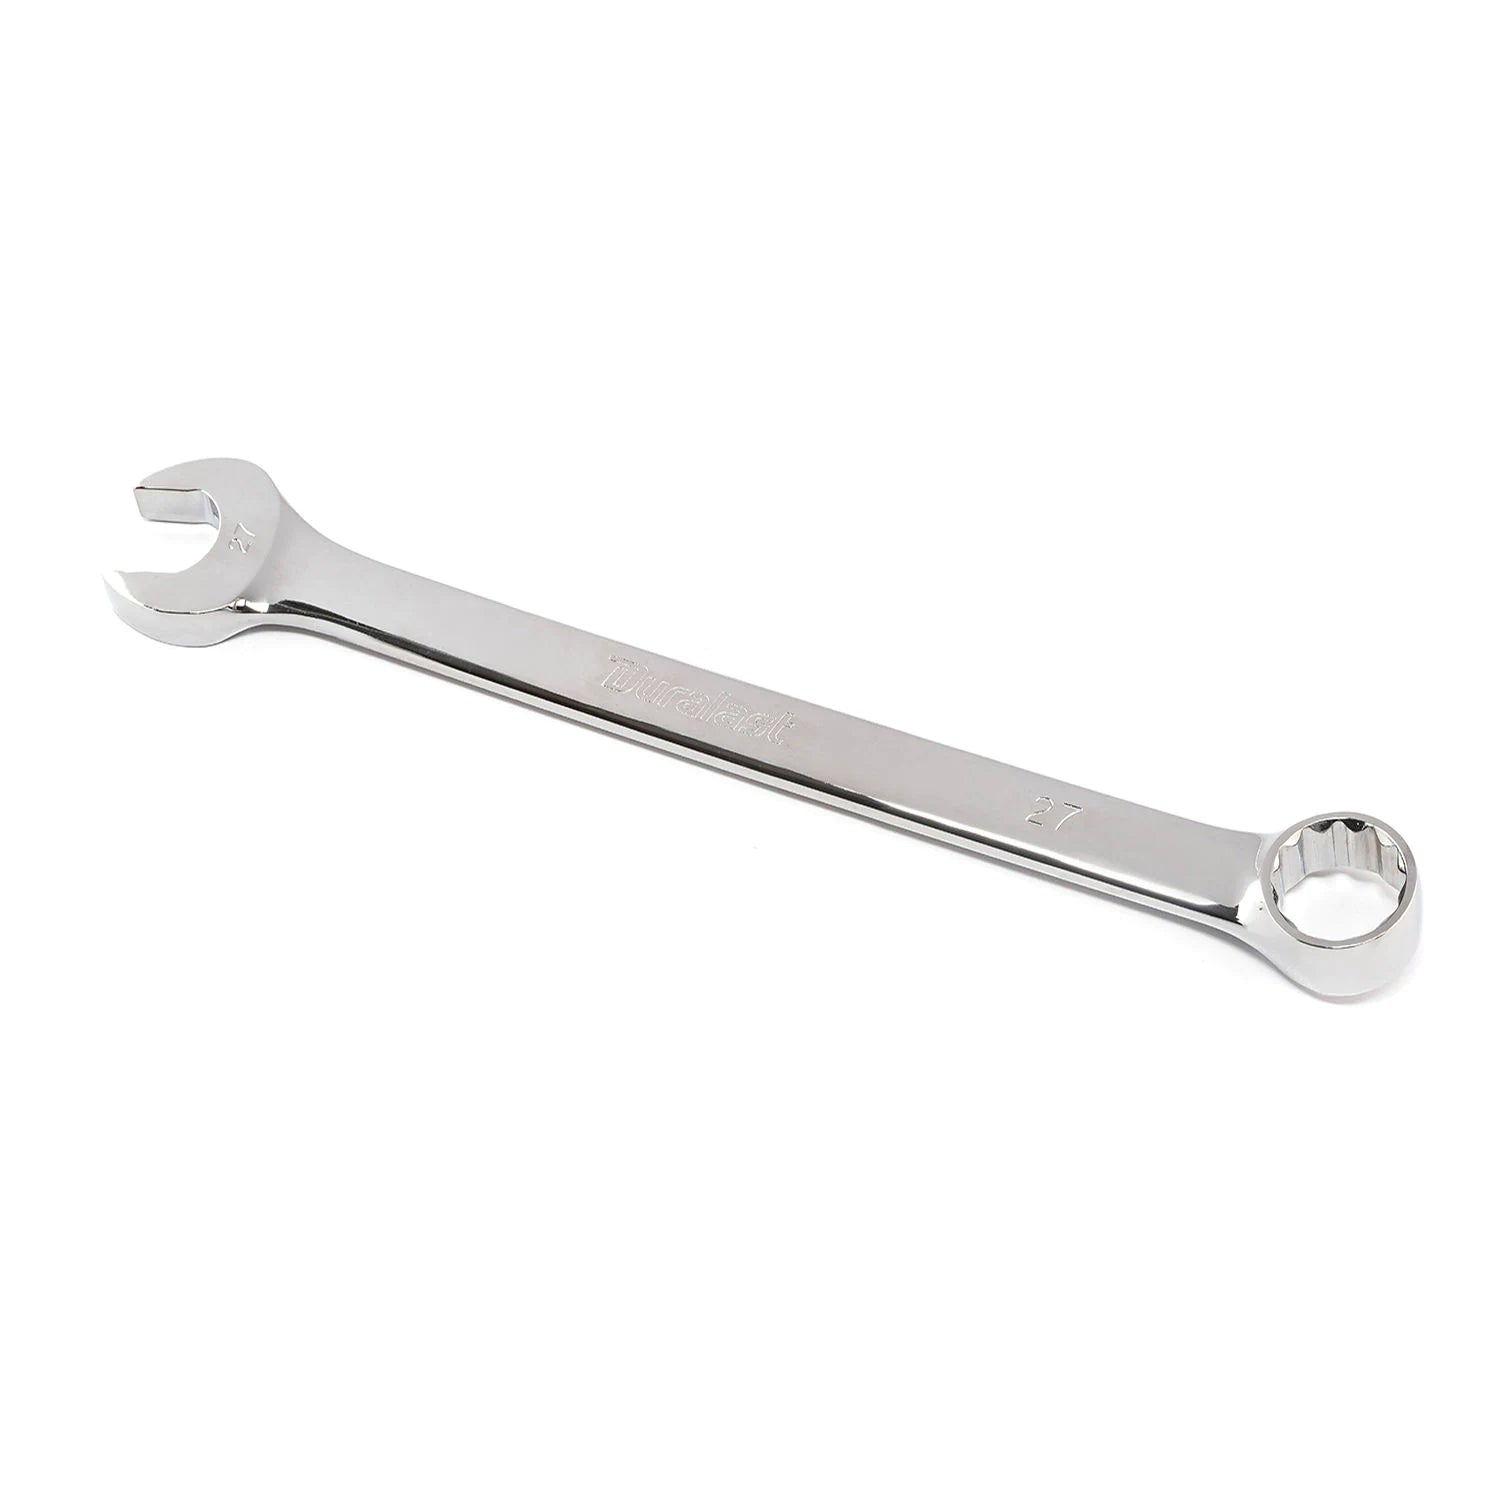 Duralast 1 1/8" Combo Wrench (54-063)